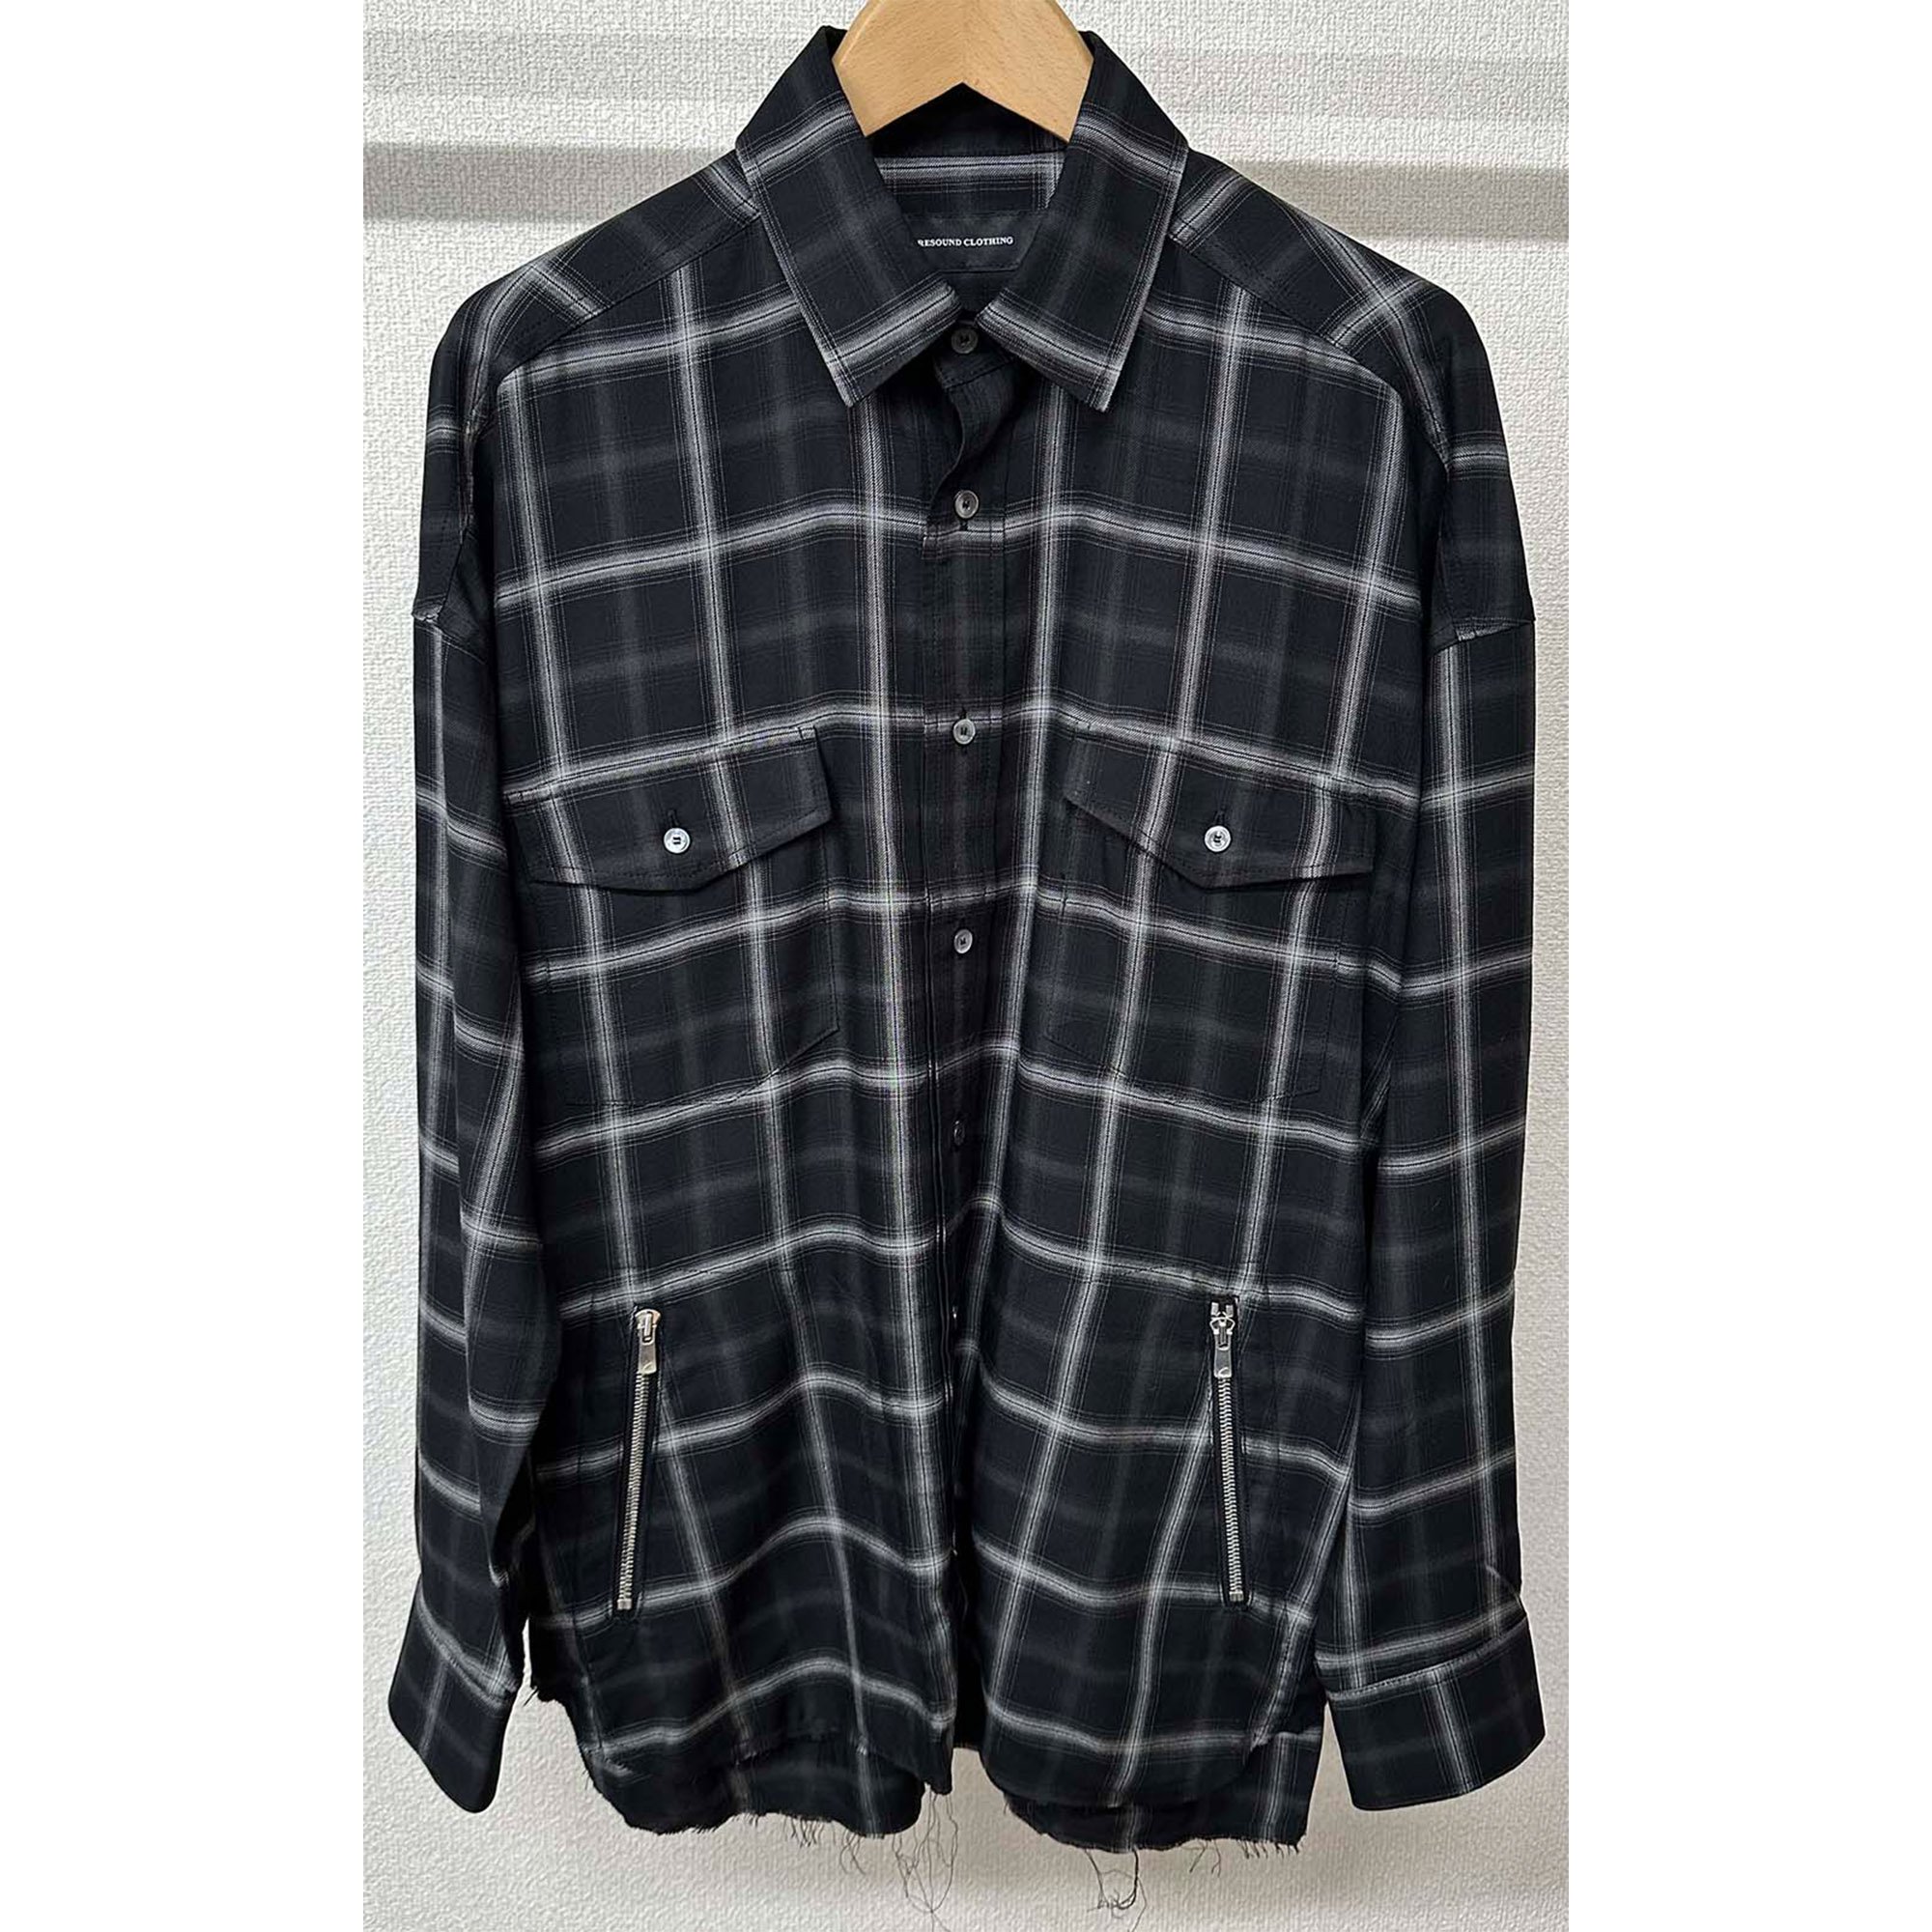 <img class='new_mark_img1' src='https://img.shop-pro.jp/img/new/icons1.gif' style='border:none;display:inline;margin:0px;padding:0px;width:auto;' />OVER gown CHECK shirts BLACK